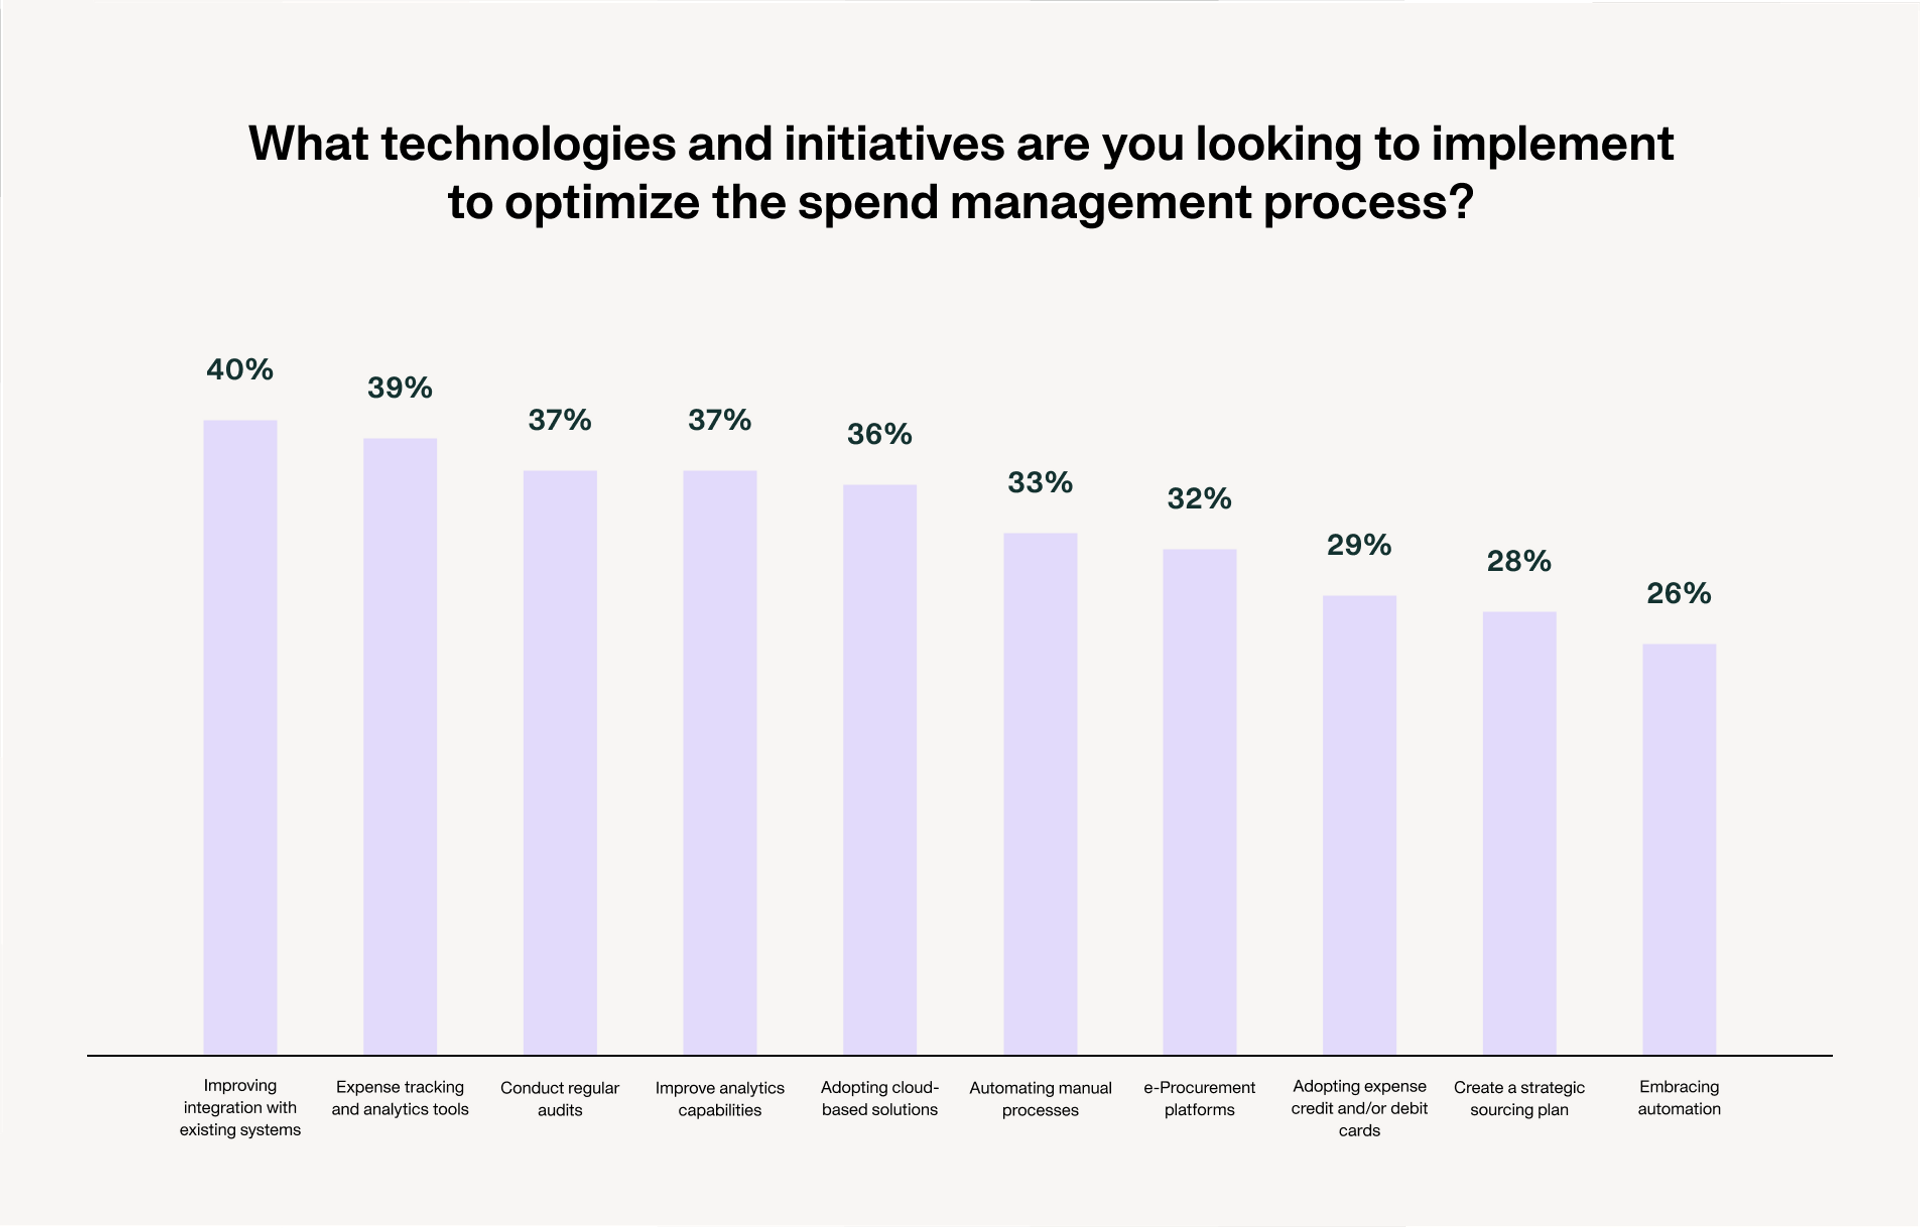 Technologies and initiatives to be implemented to optimise the spend management process